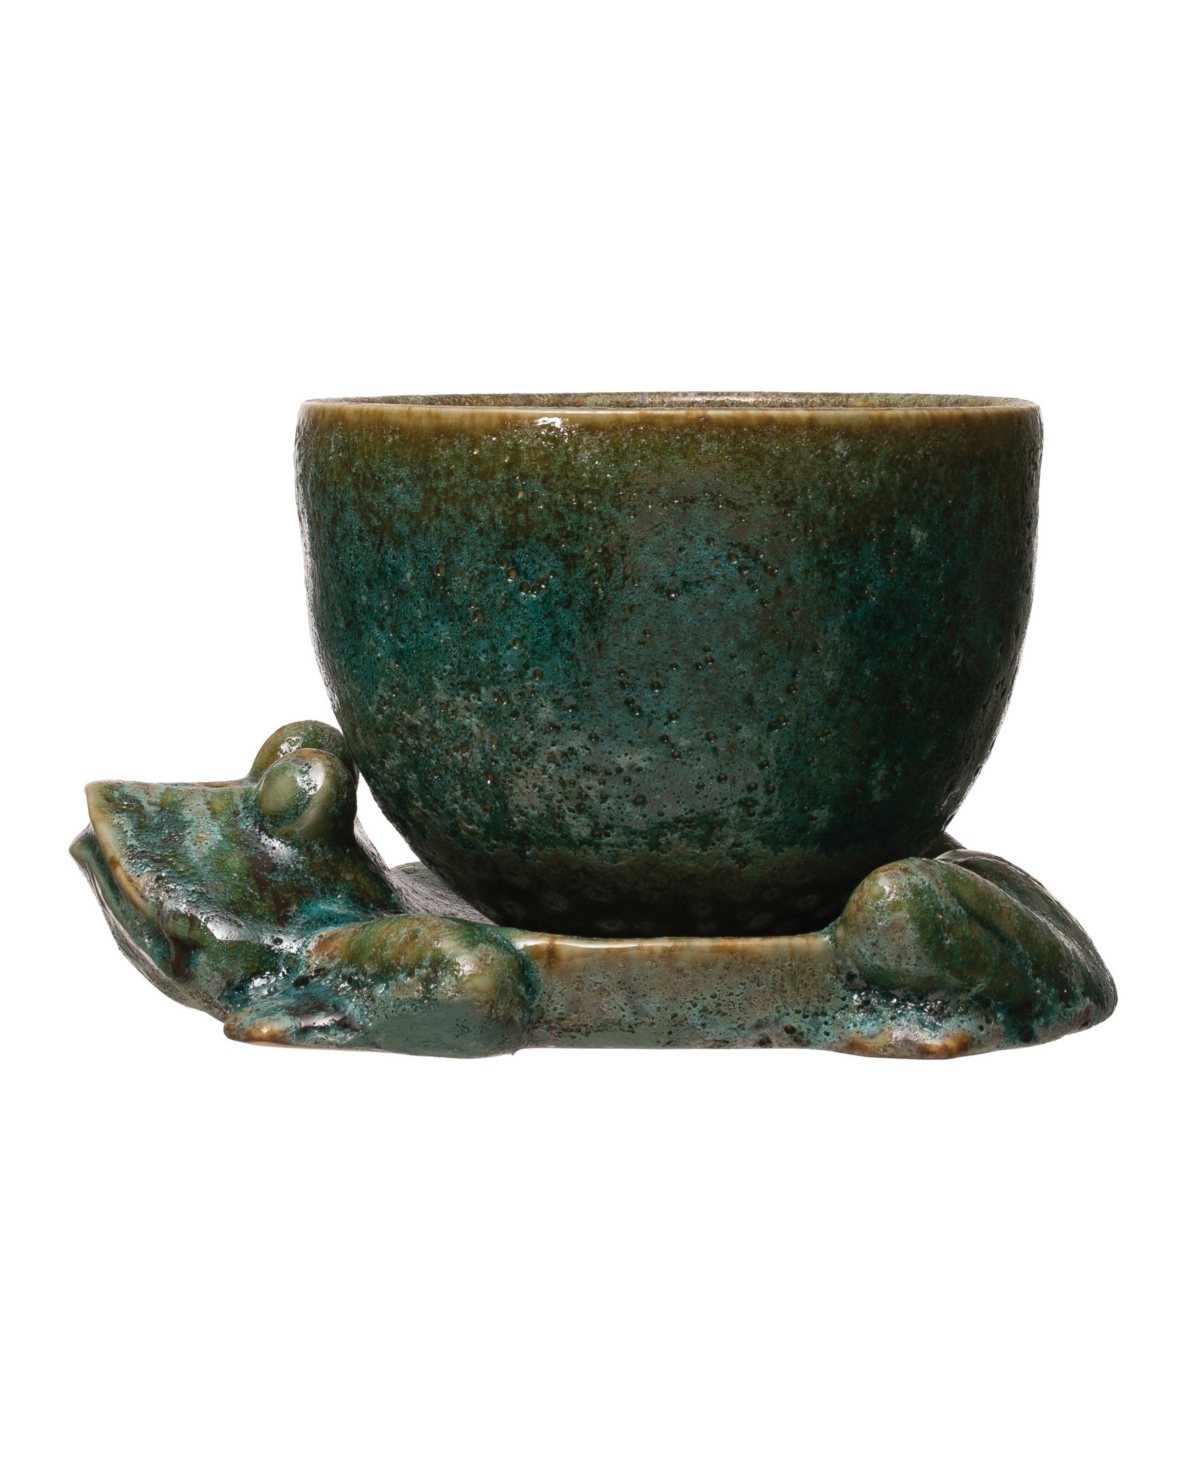 Stoneware Planter with Frog Base, Set of 2 Each - Green